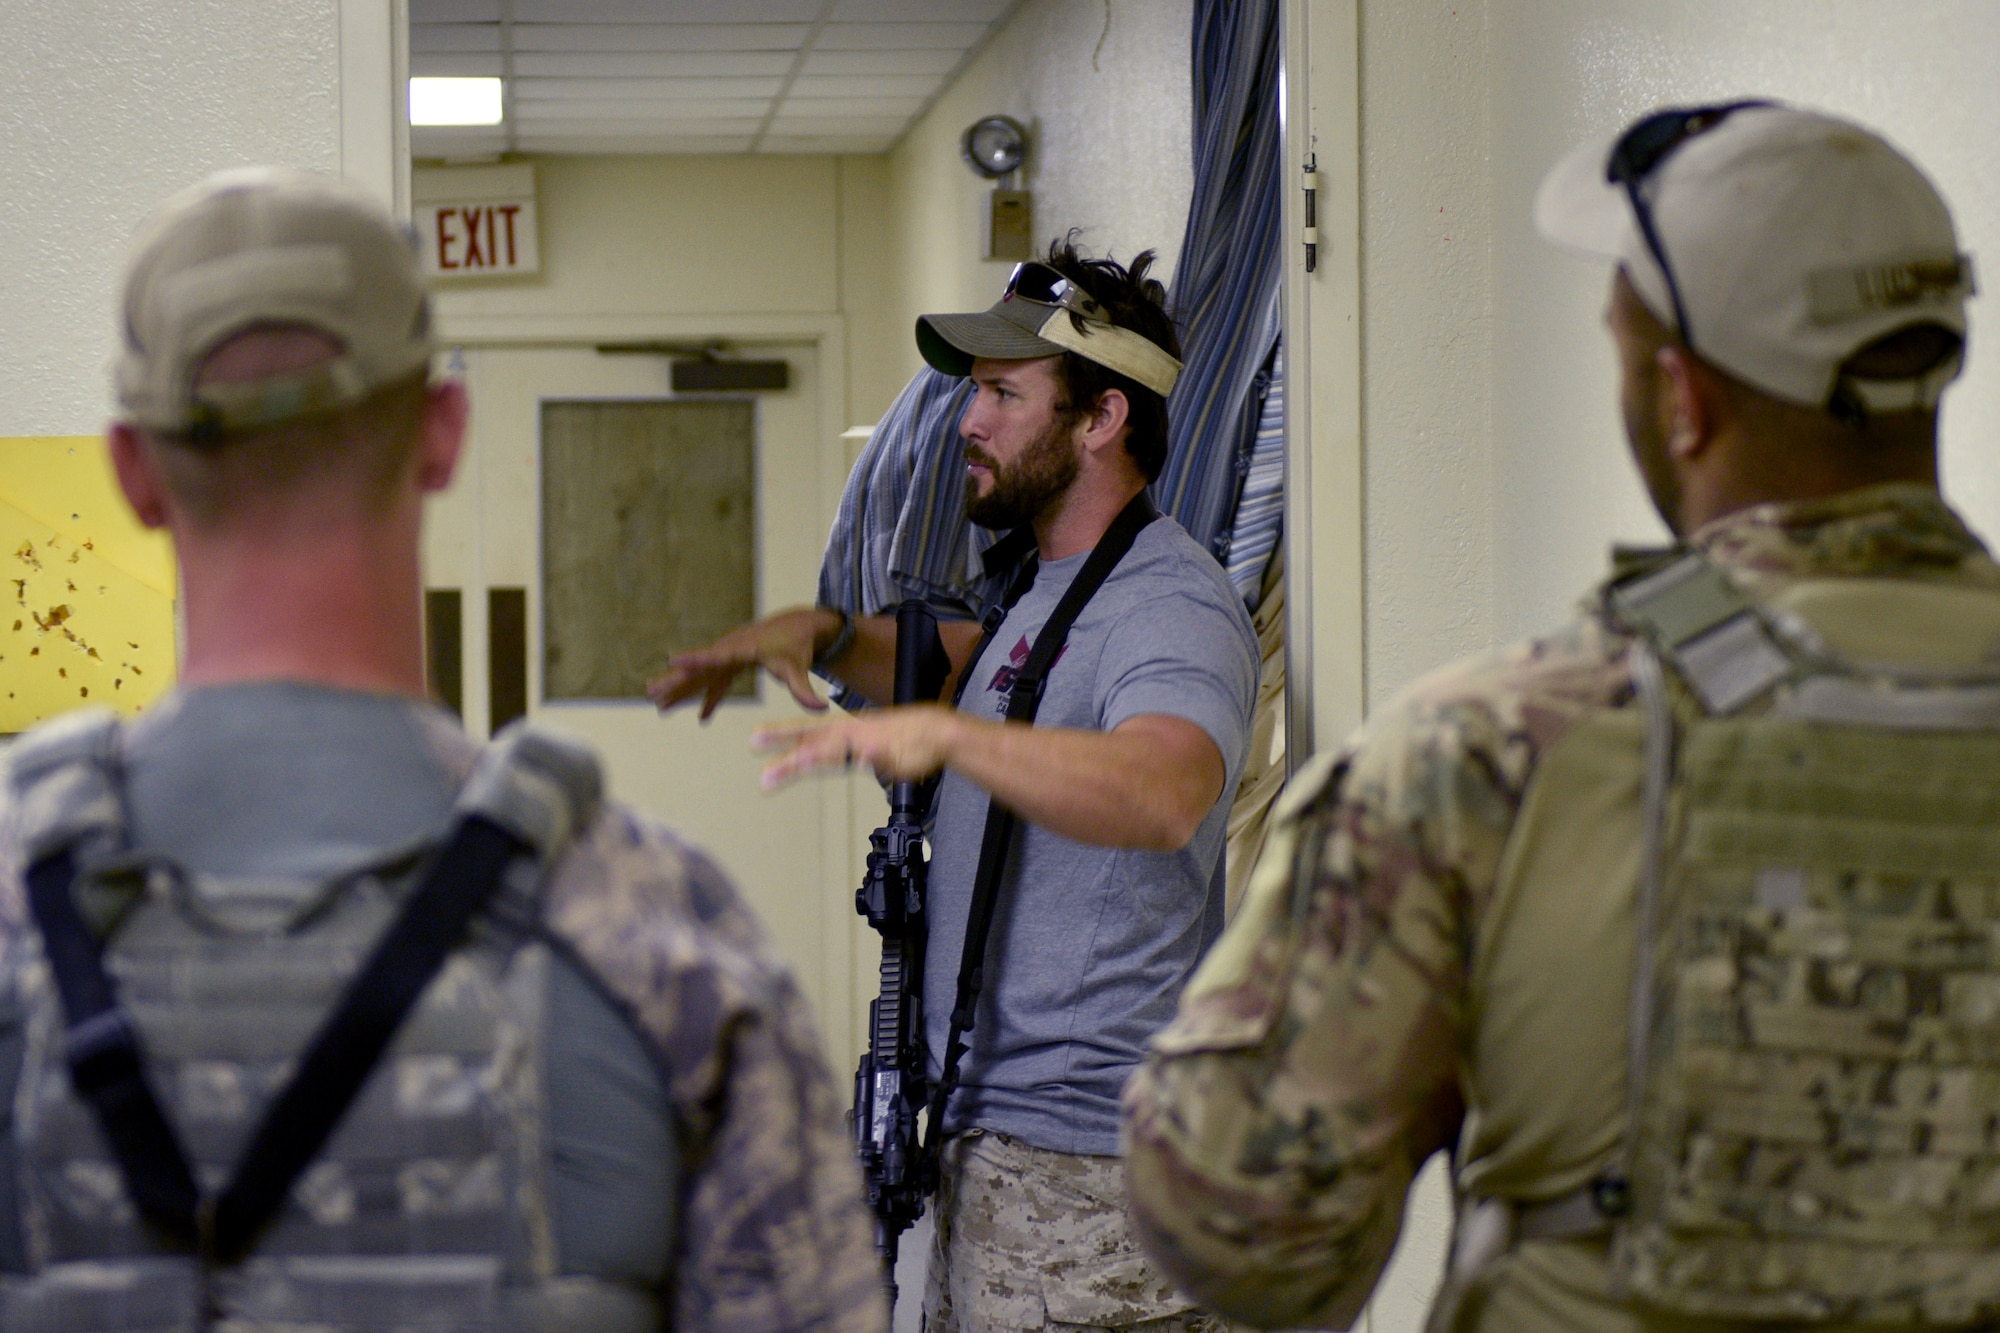 The Shooting Institute chief executive officer, Jared Hudson, demonstrates close quarters combat maneuvers during the Special Weapons and Tactics and Close Quarters Combat training at the Eldorado Air Force Station in Eldorado, Texas, May 10, 2018. The Shooting Institute, a company made up of former Navy SEALS, special operations and law enforcement individuals that travels around providing expert level firearms and tactical training provided the training. (U.S. Air Force photo by Senior Airman Randall Moose/Released)